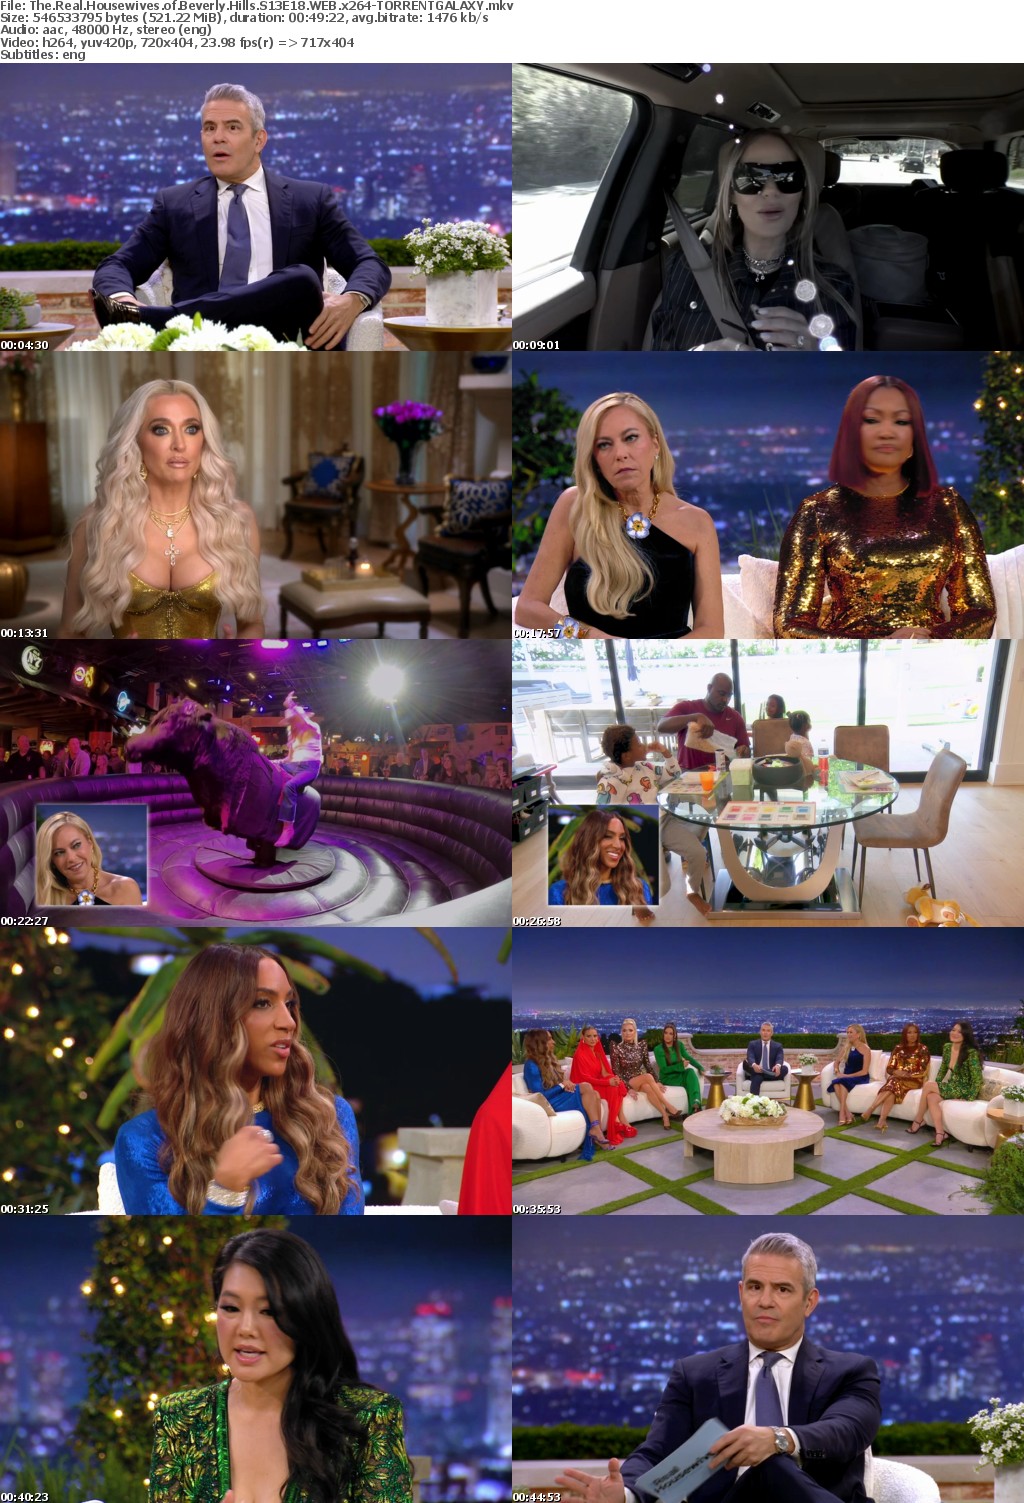 The Real Housewives of Beverly Hills S13E18 WEB x264-GALAXY